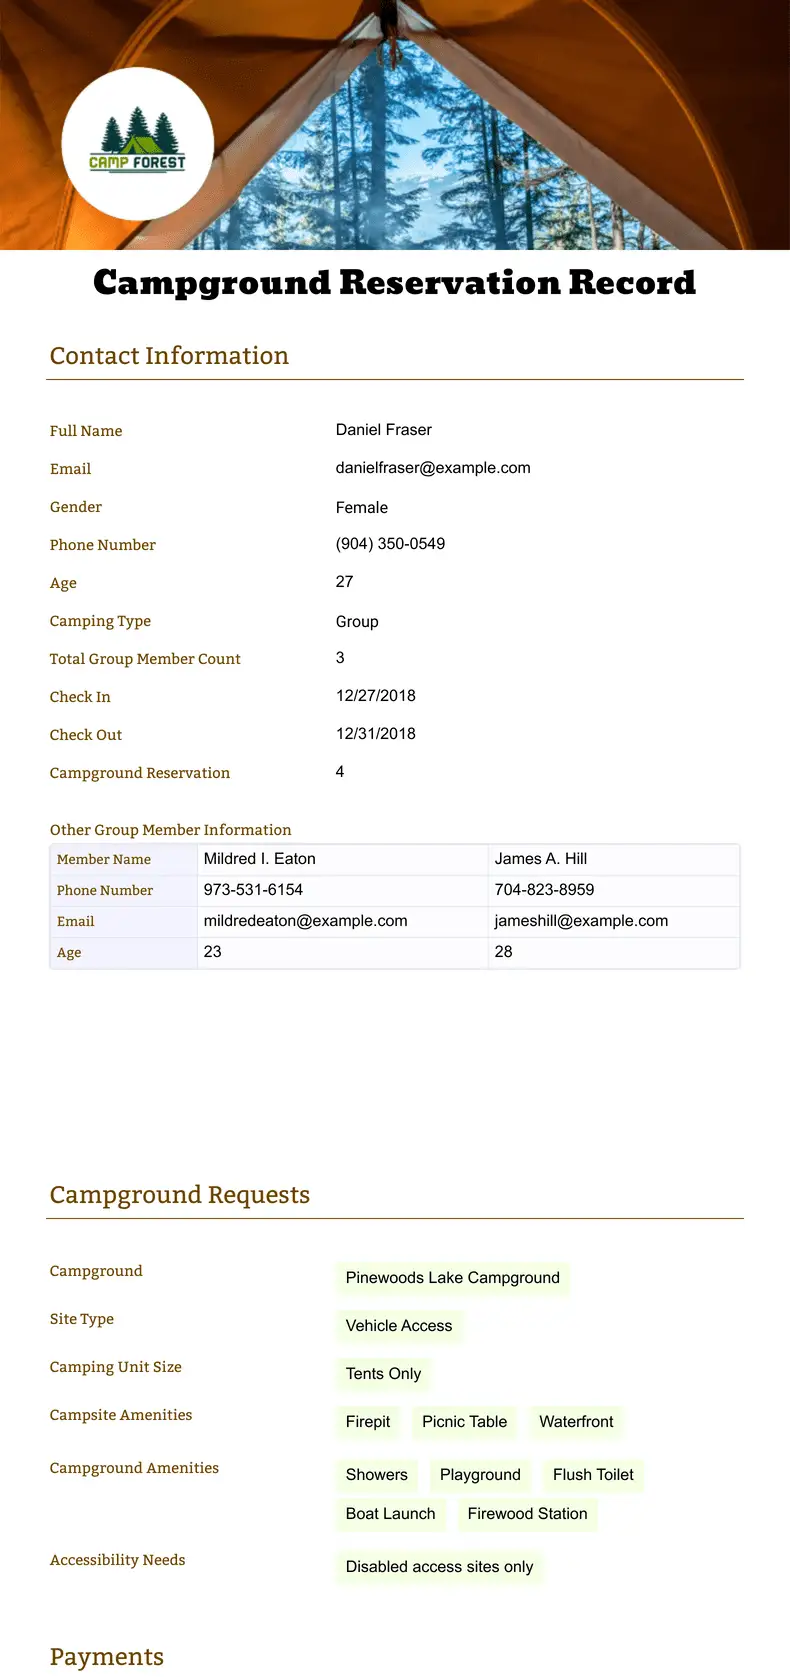 Campground Reservation Record